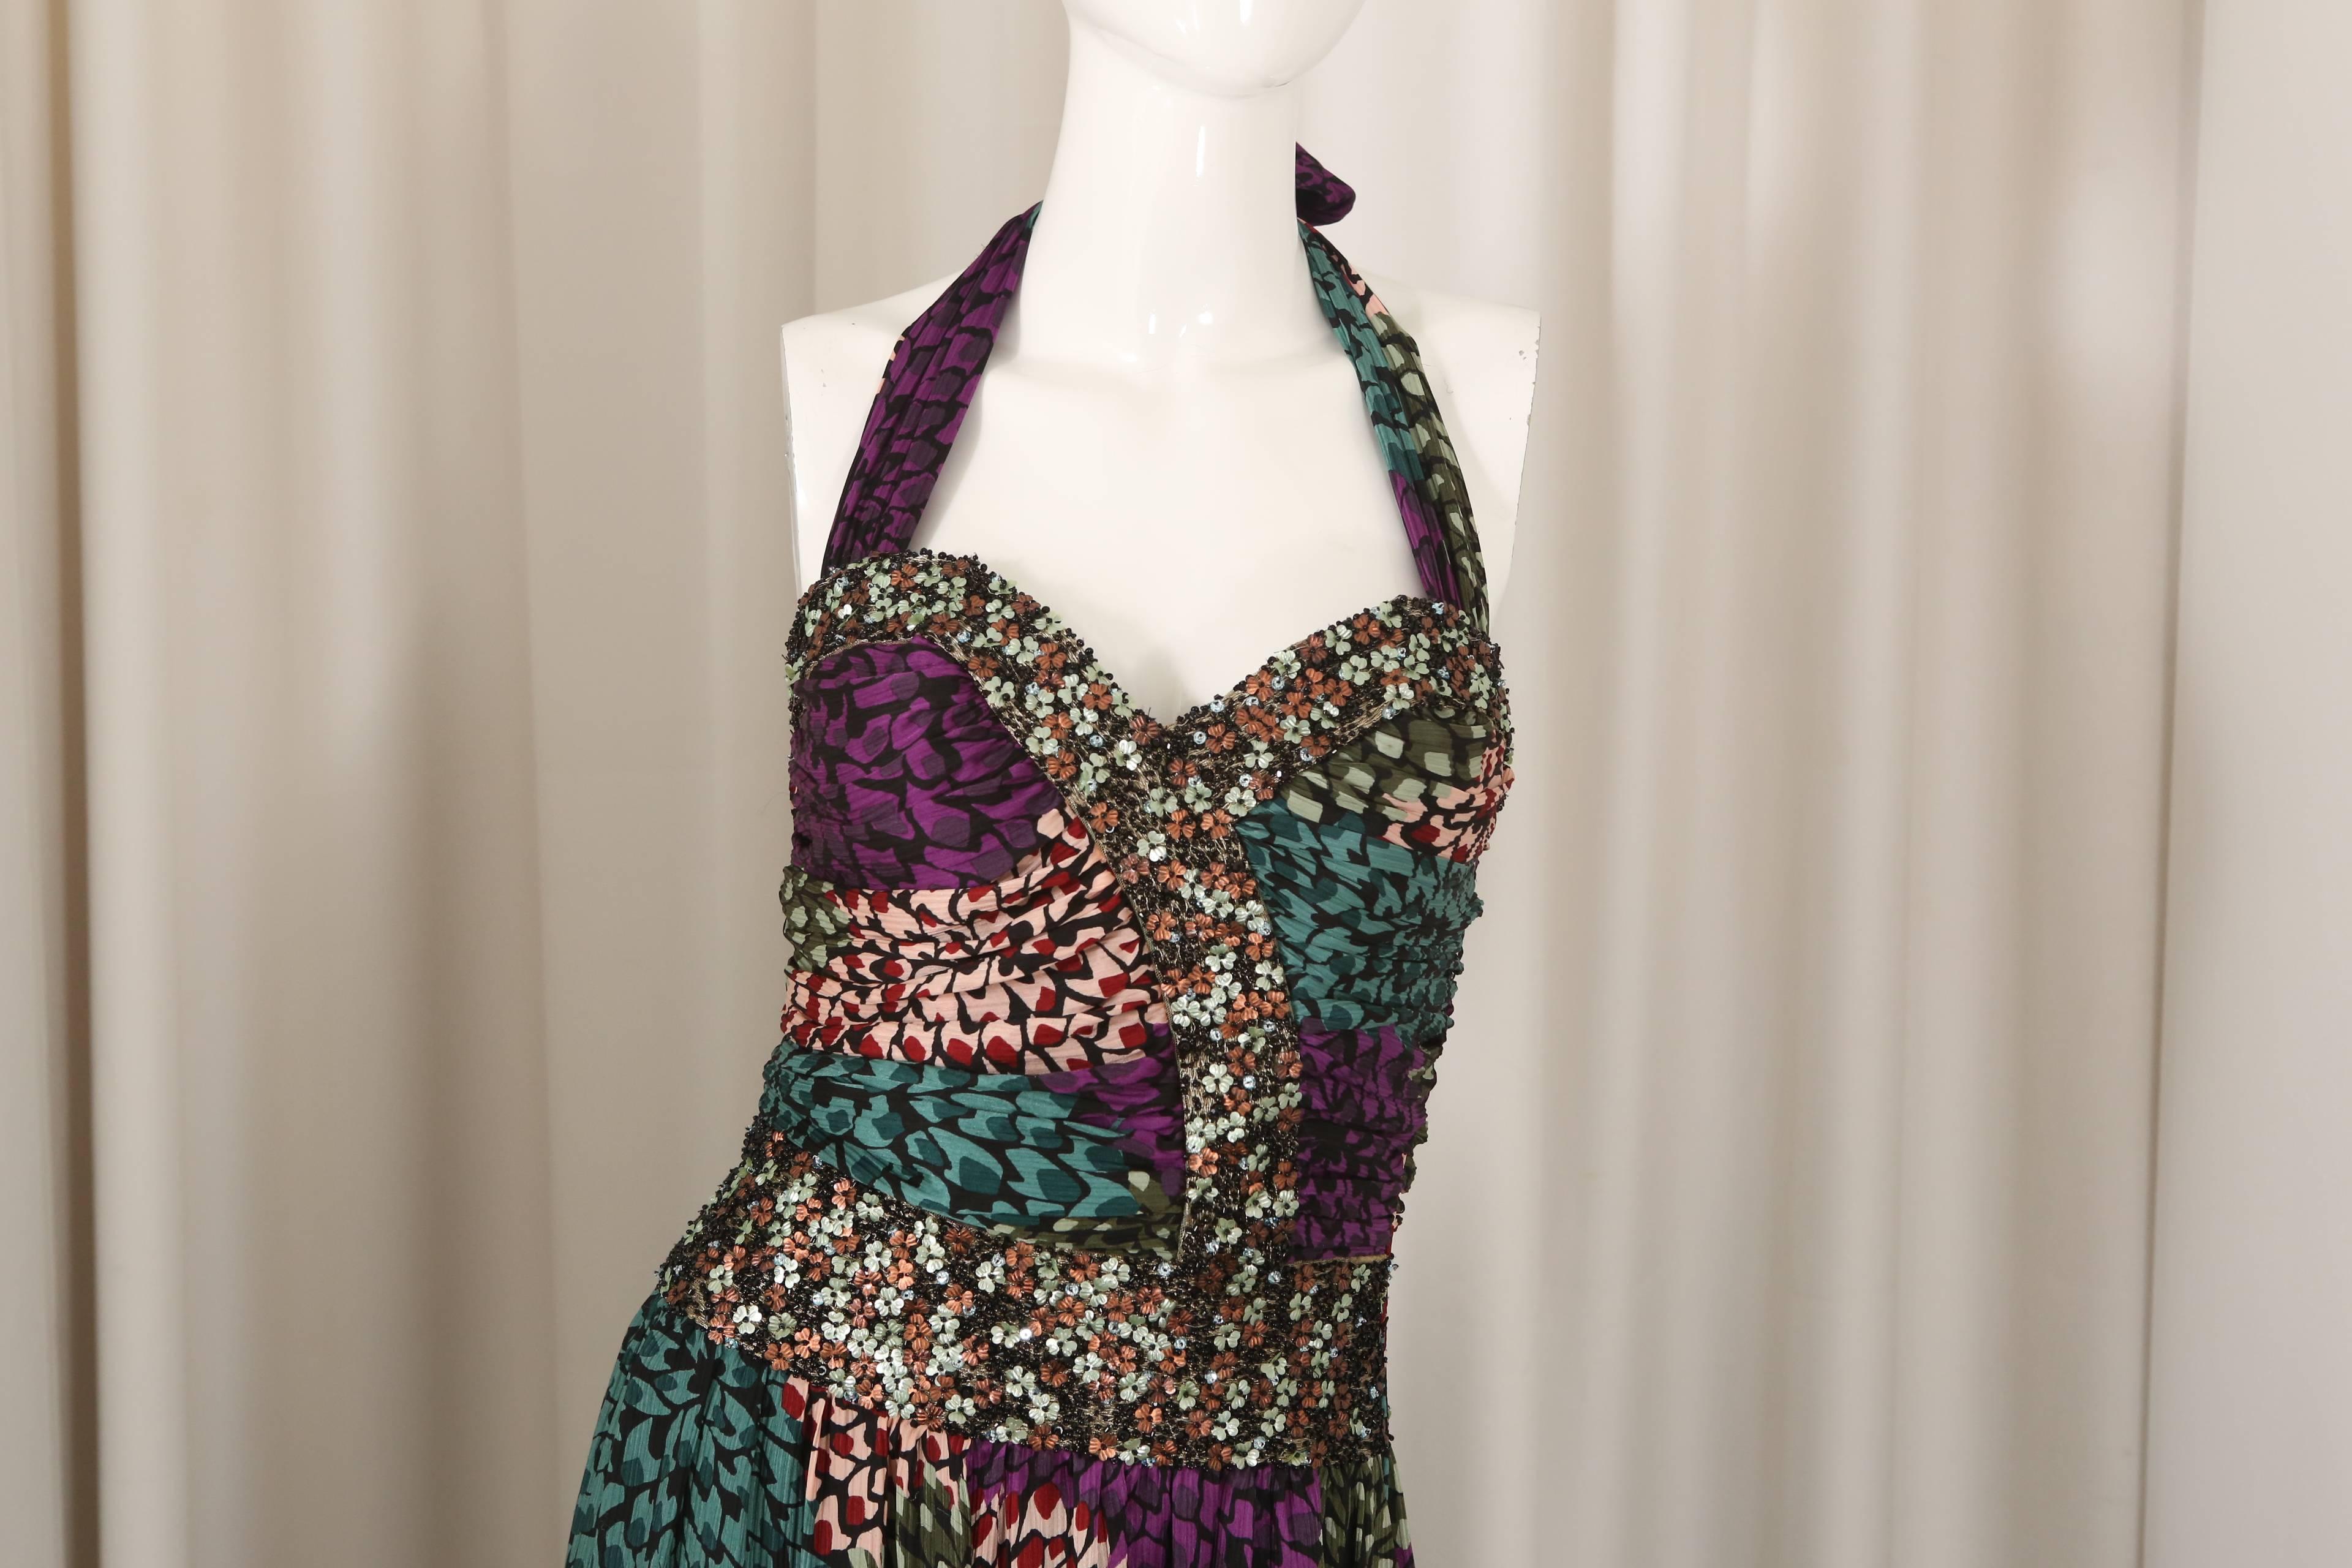 Missoni purple/green printed halter gown with floral embellishments at wasit & bodice.  